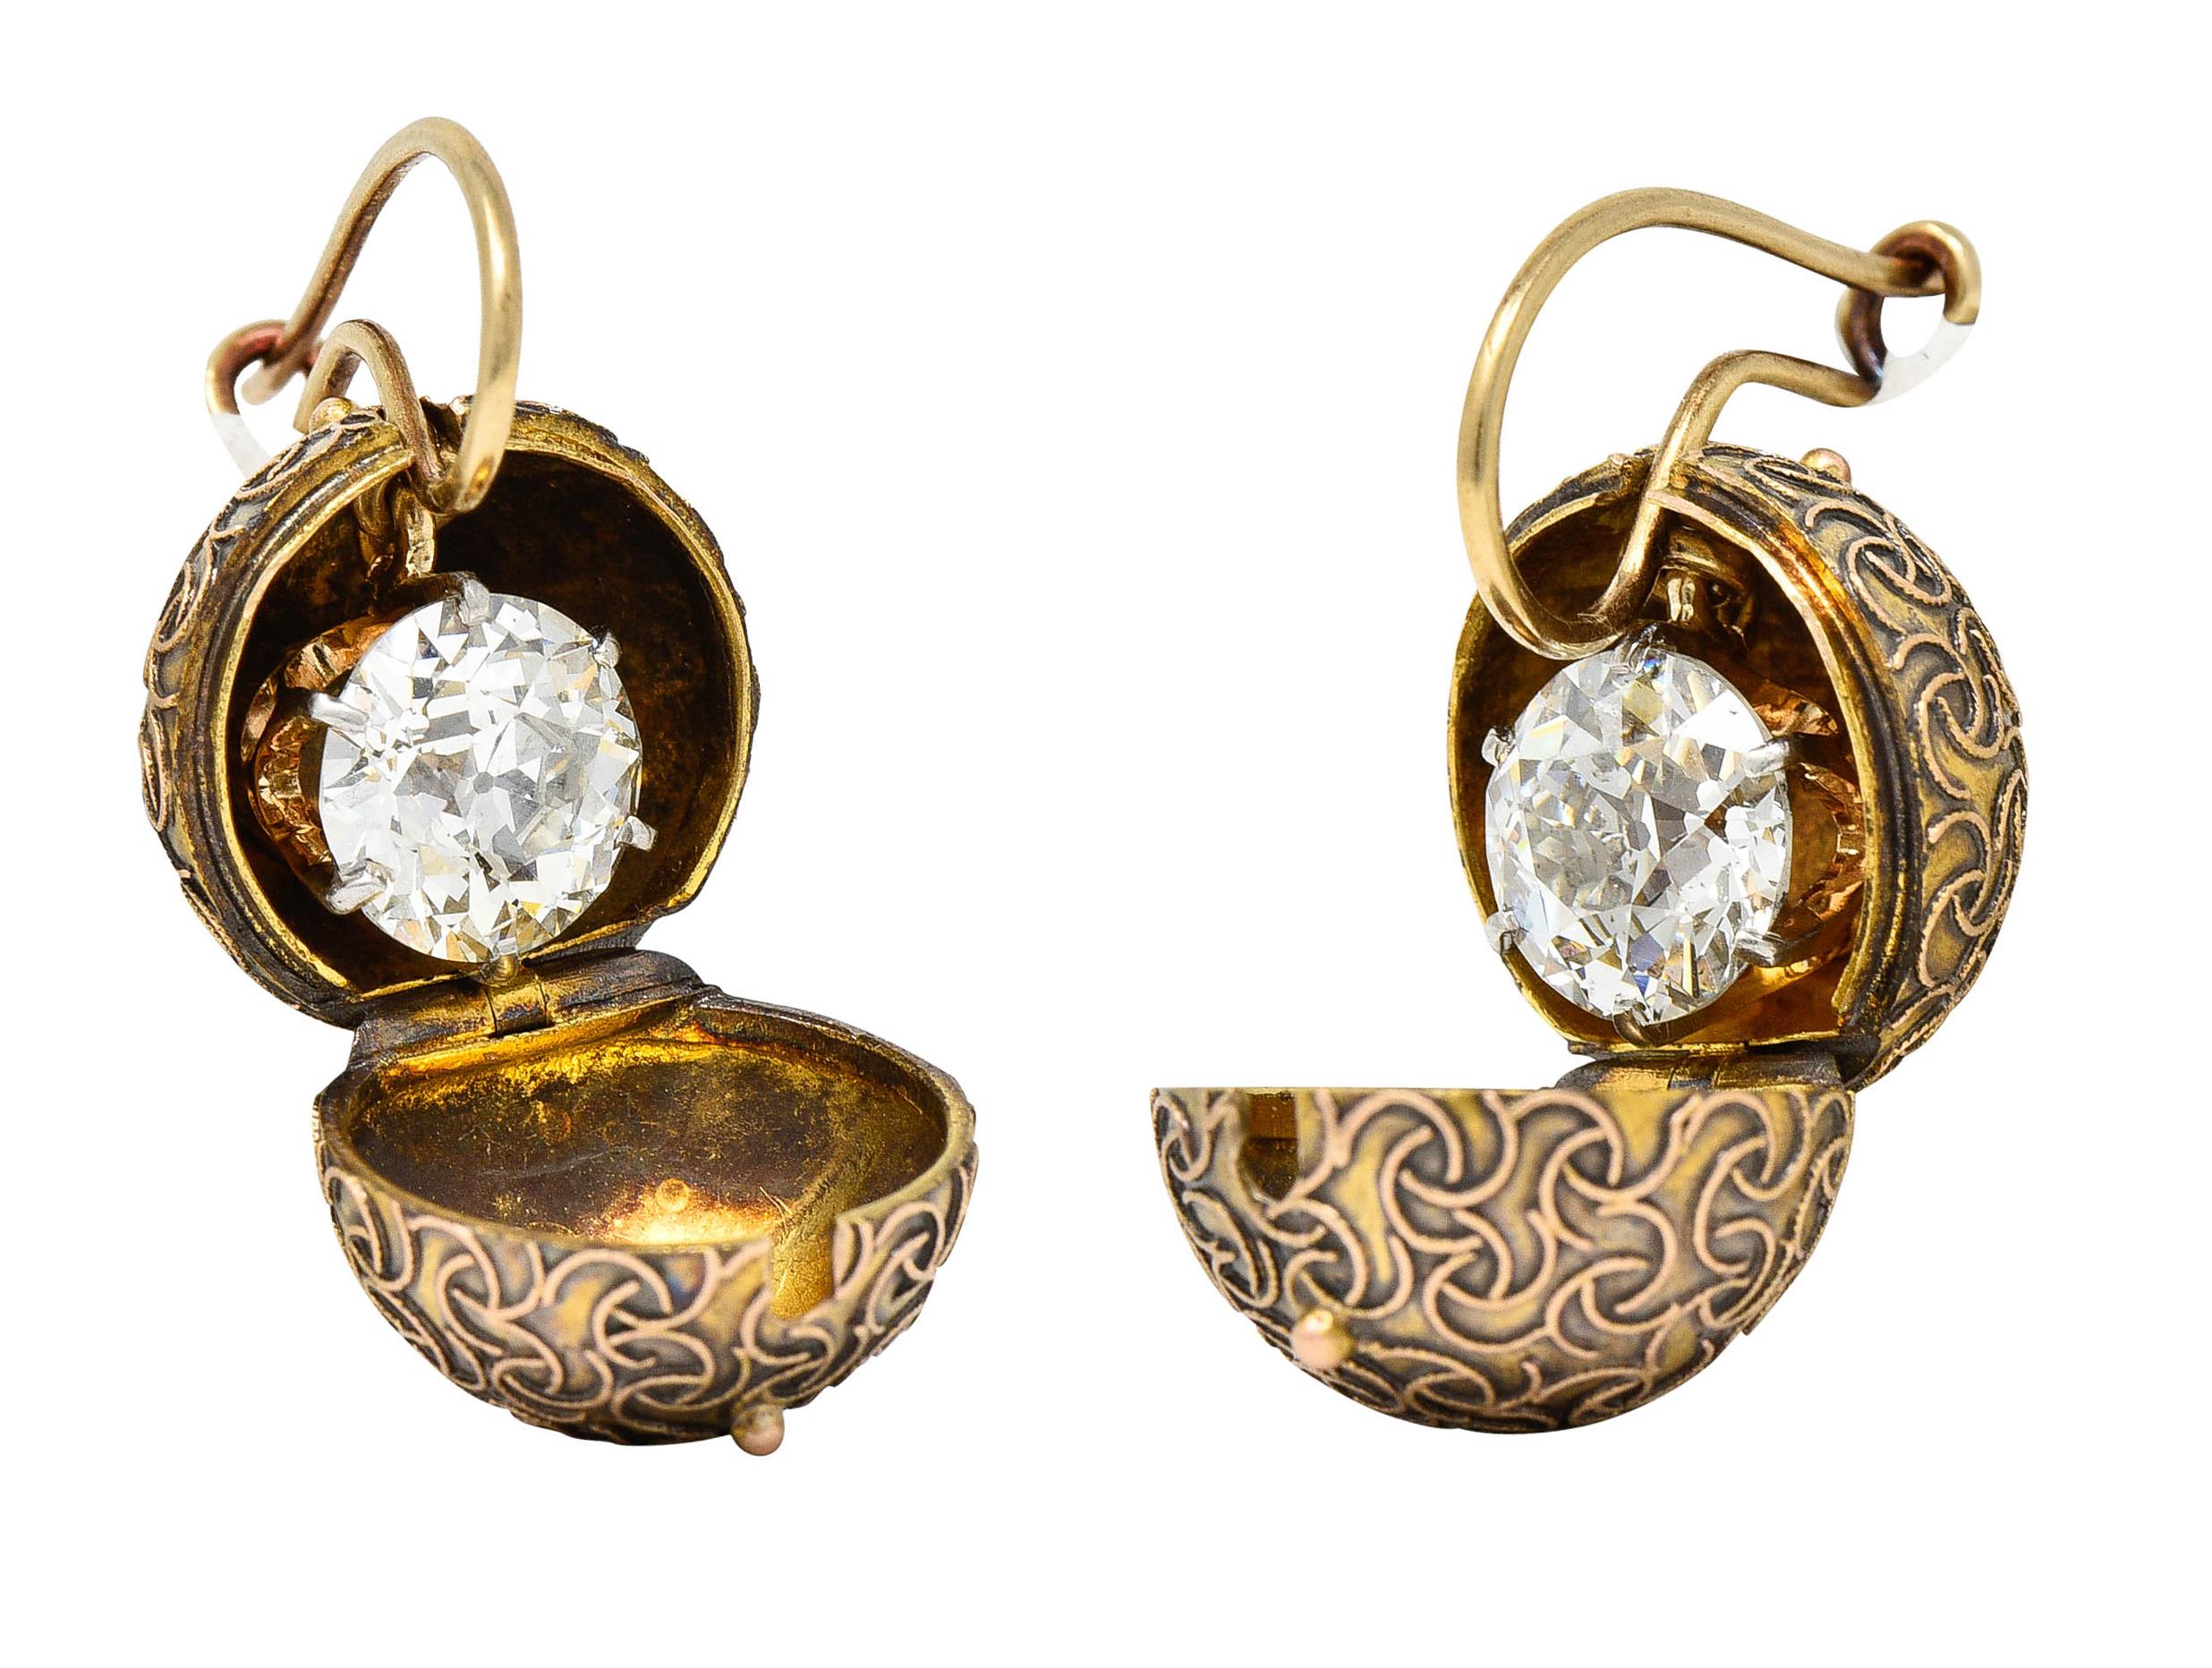 Drop earrings are encased in domed ball carriage covers

Decorated with raised scrollwork throughout and open on a hinge to reveal diamonds

Old European cut diamonds weigh in total approximately 3.18 carats - J/K in color with SI1 clarity

Talon